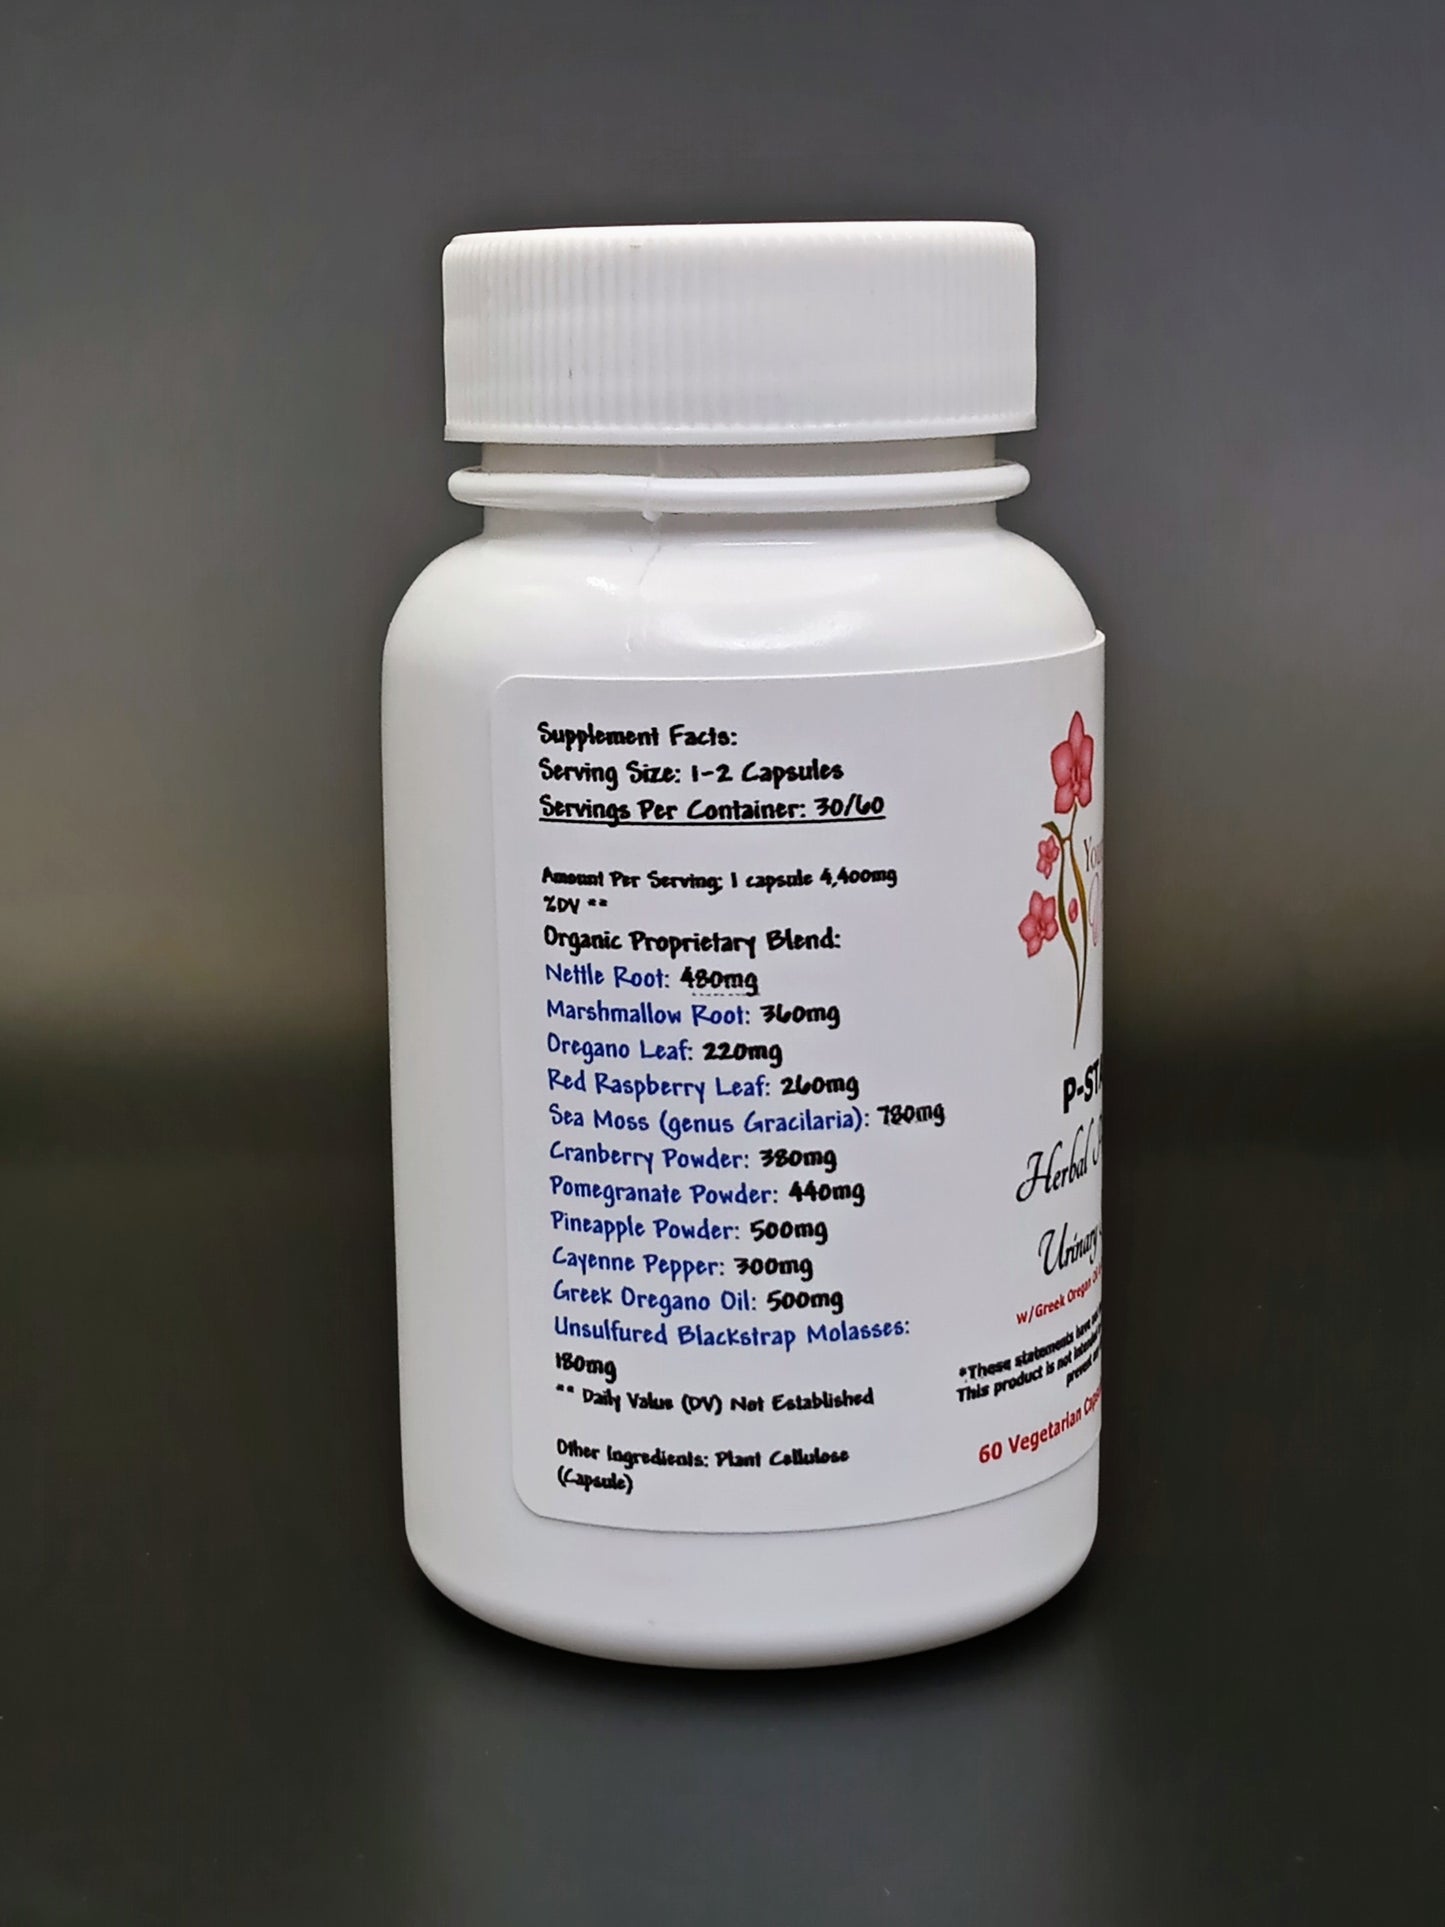 P-STATE: Herbal Prostate & Urinary Support FOR HIM, 60 V-Caps 4,900mg